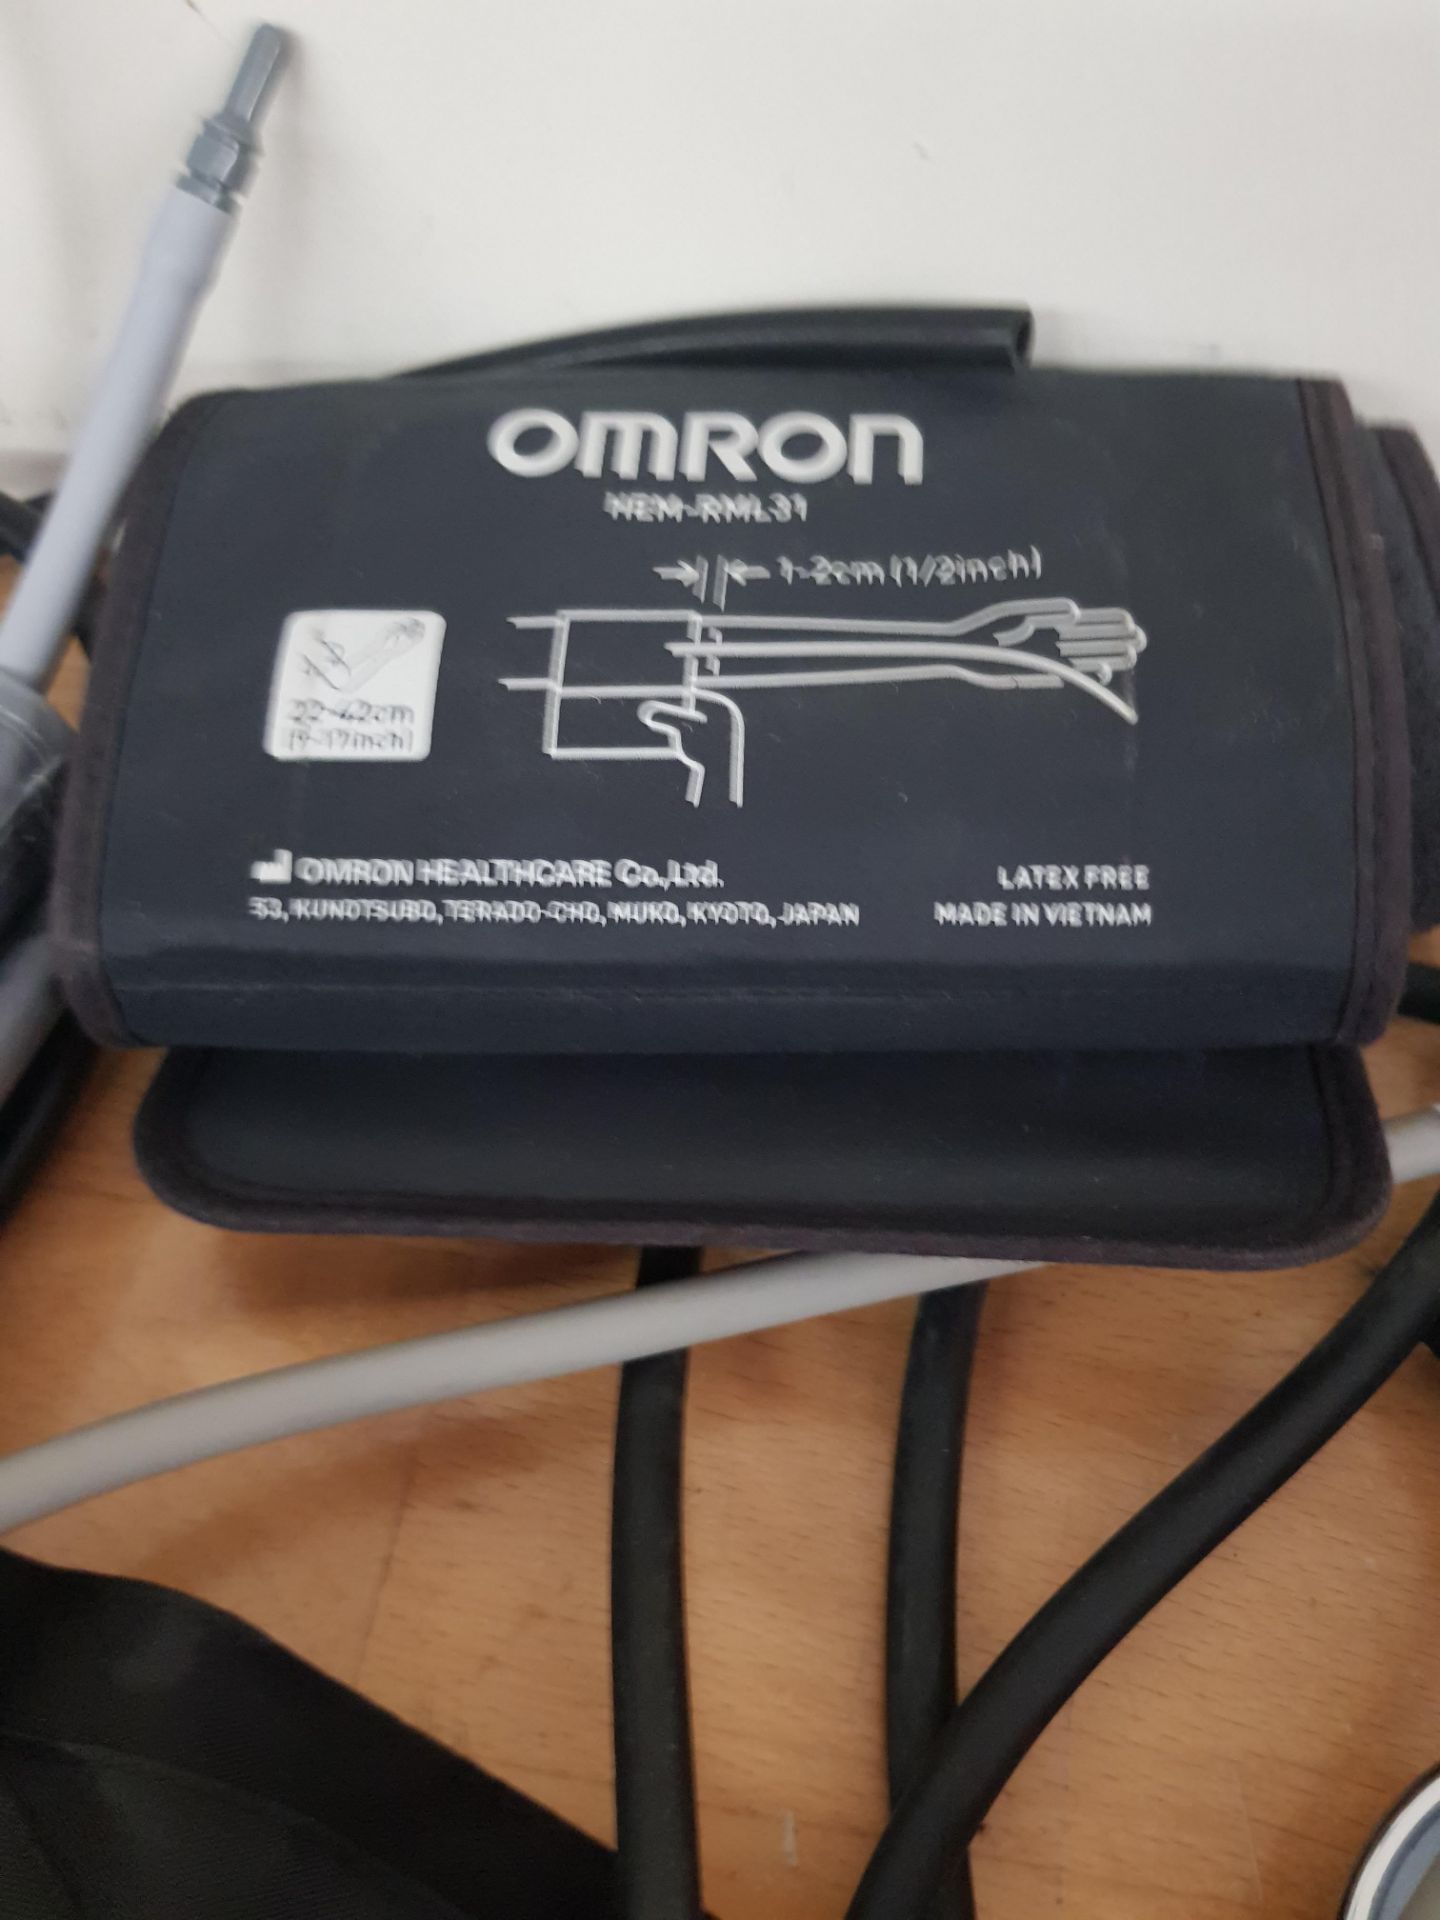 LOT OF VARIOUS SPHYGMOMANOMETERS AND CUFFS INCLUDING OMRON - Image 2 of 5